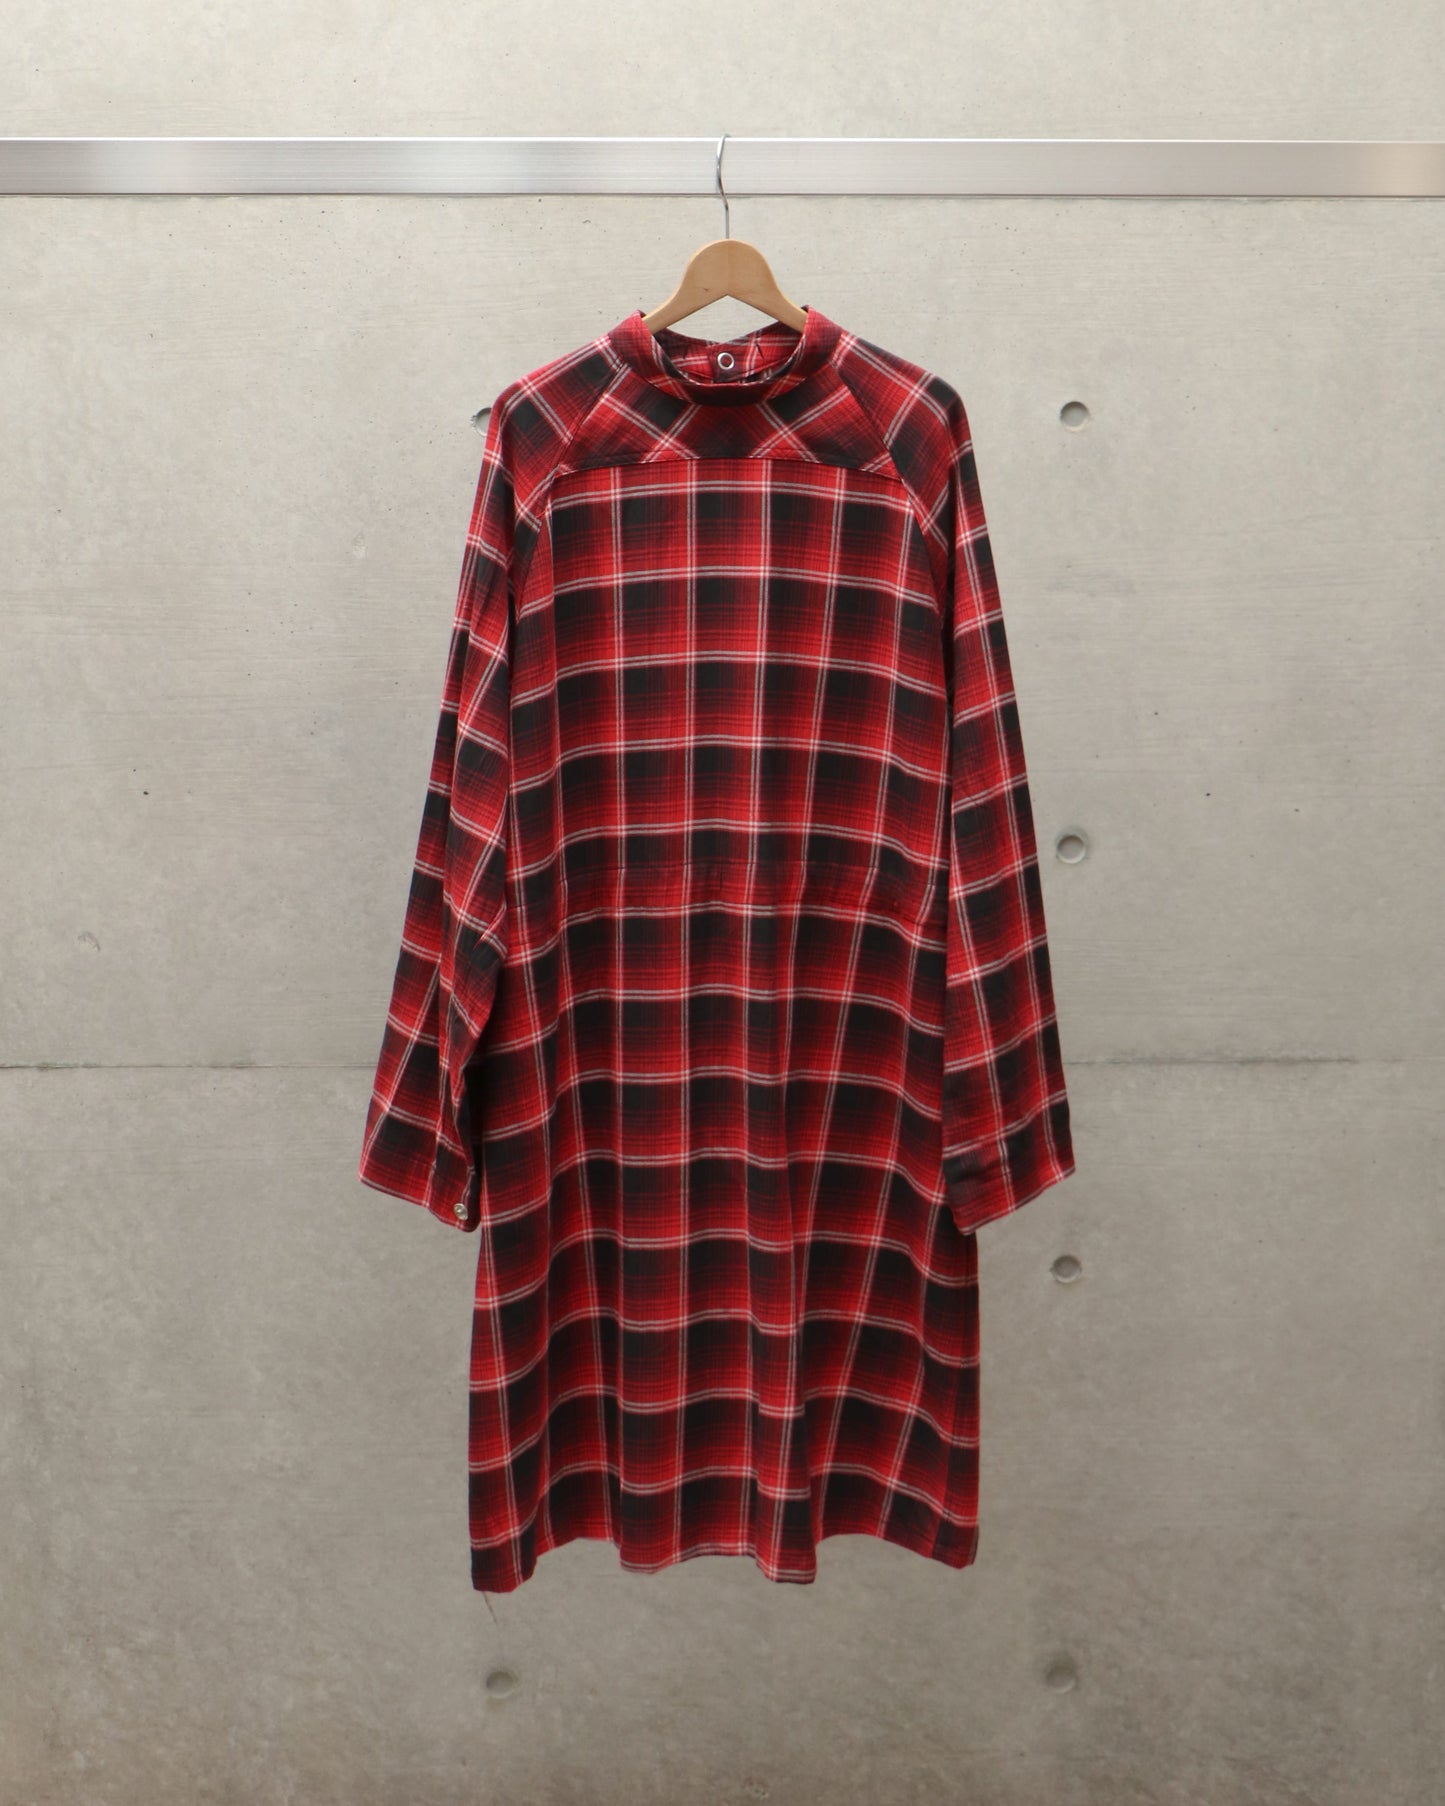 medical gown shirt.(ombre check)